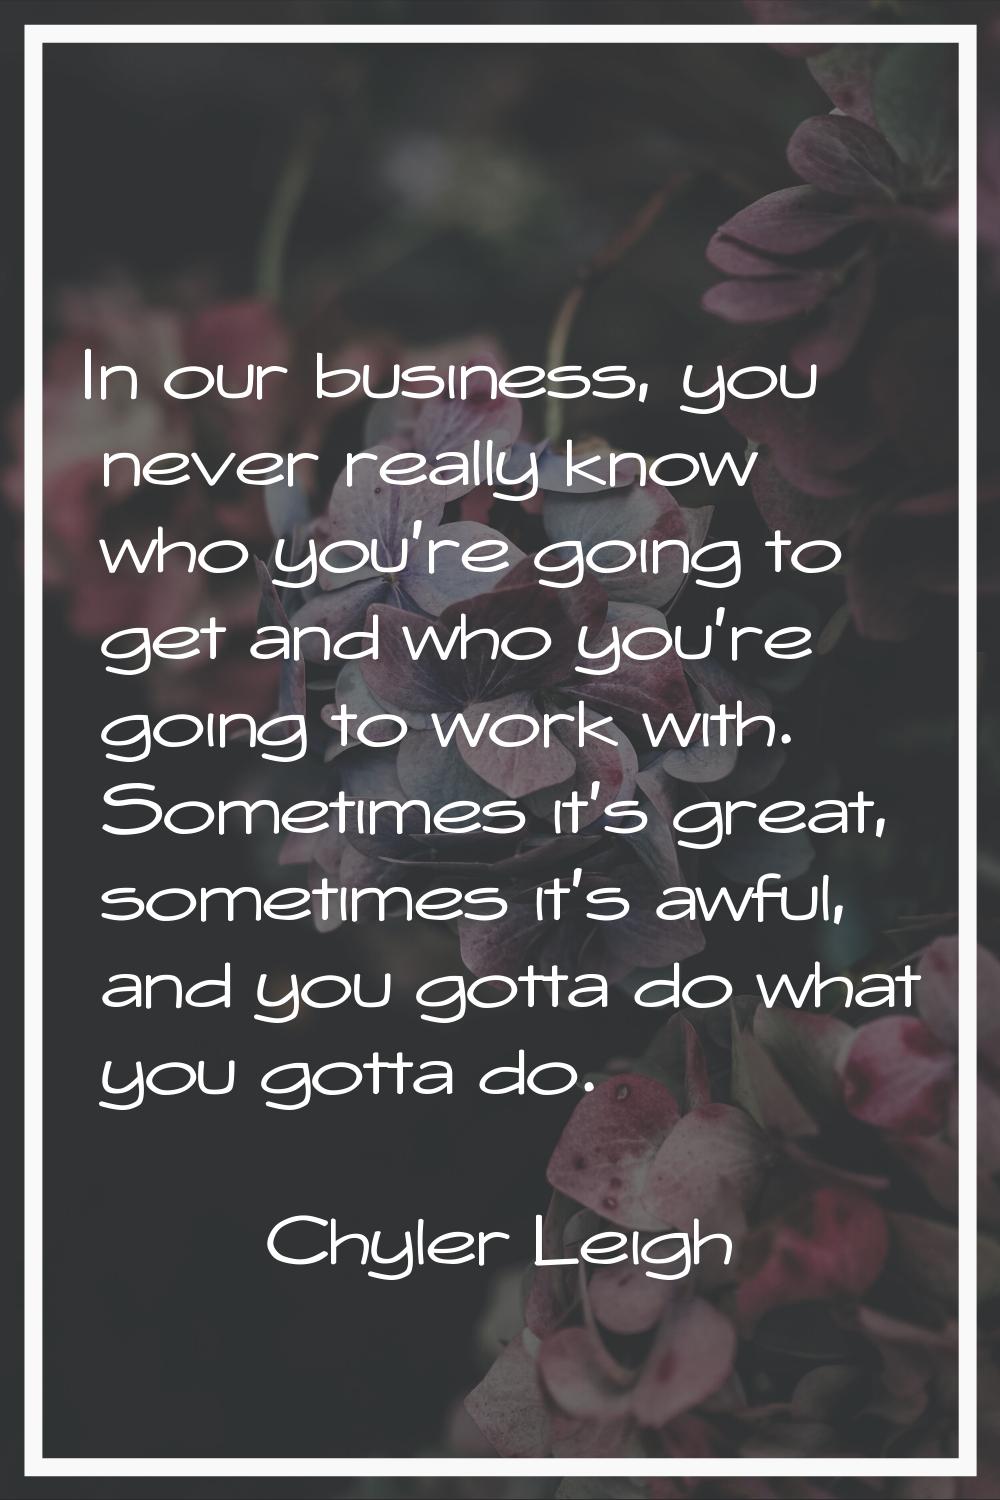 In our business, you never really know who you're going to get and who you're going to work with. S